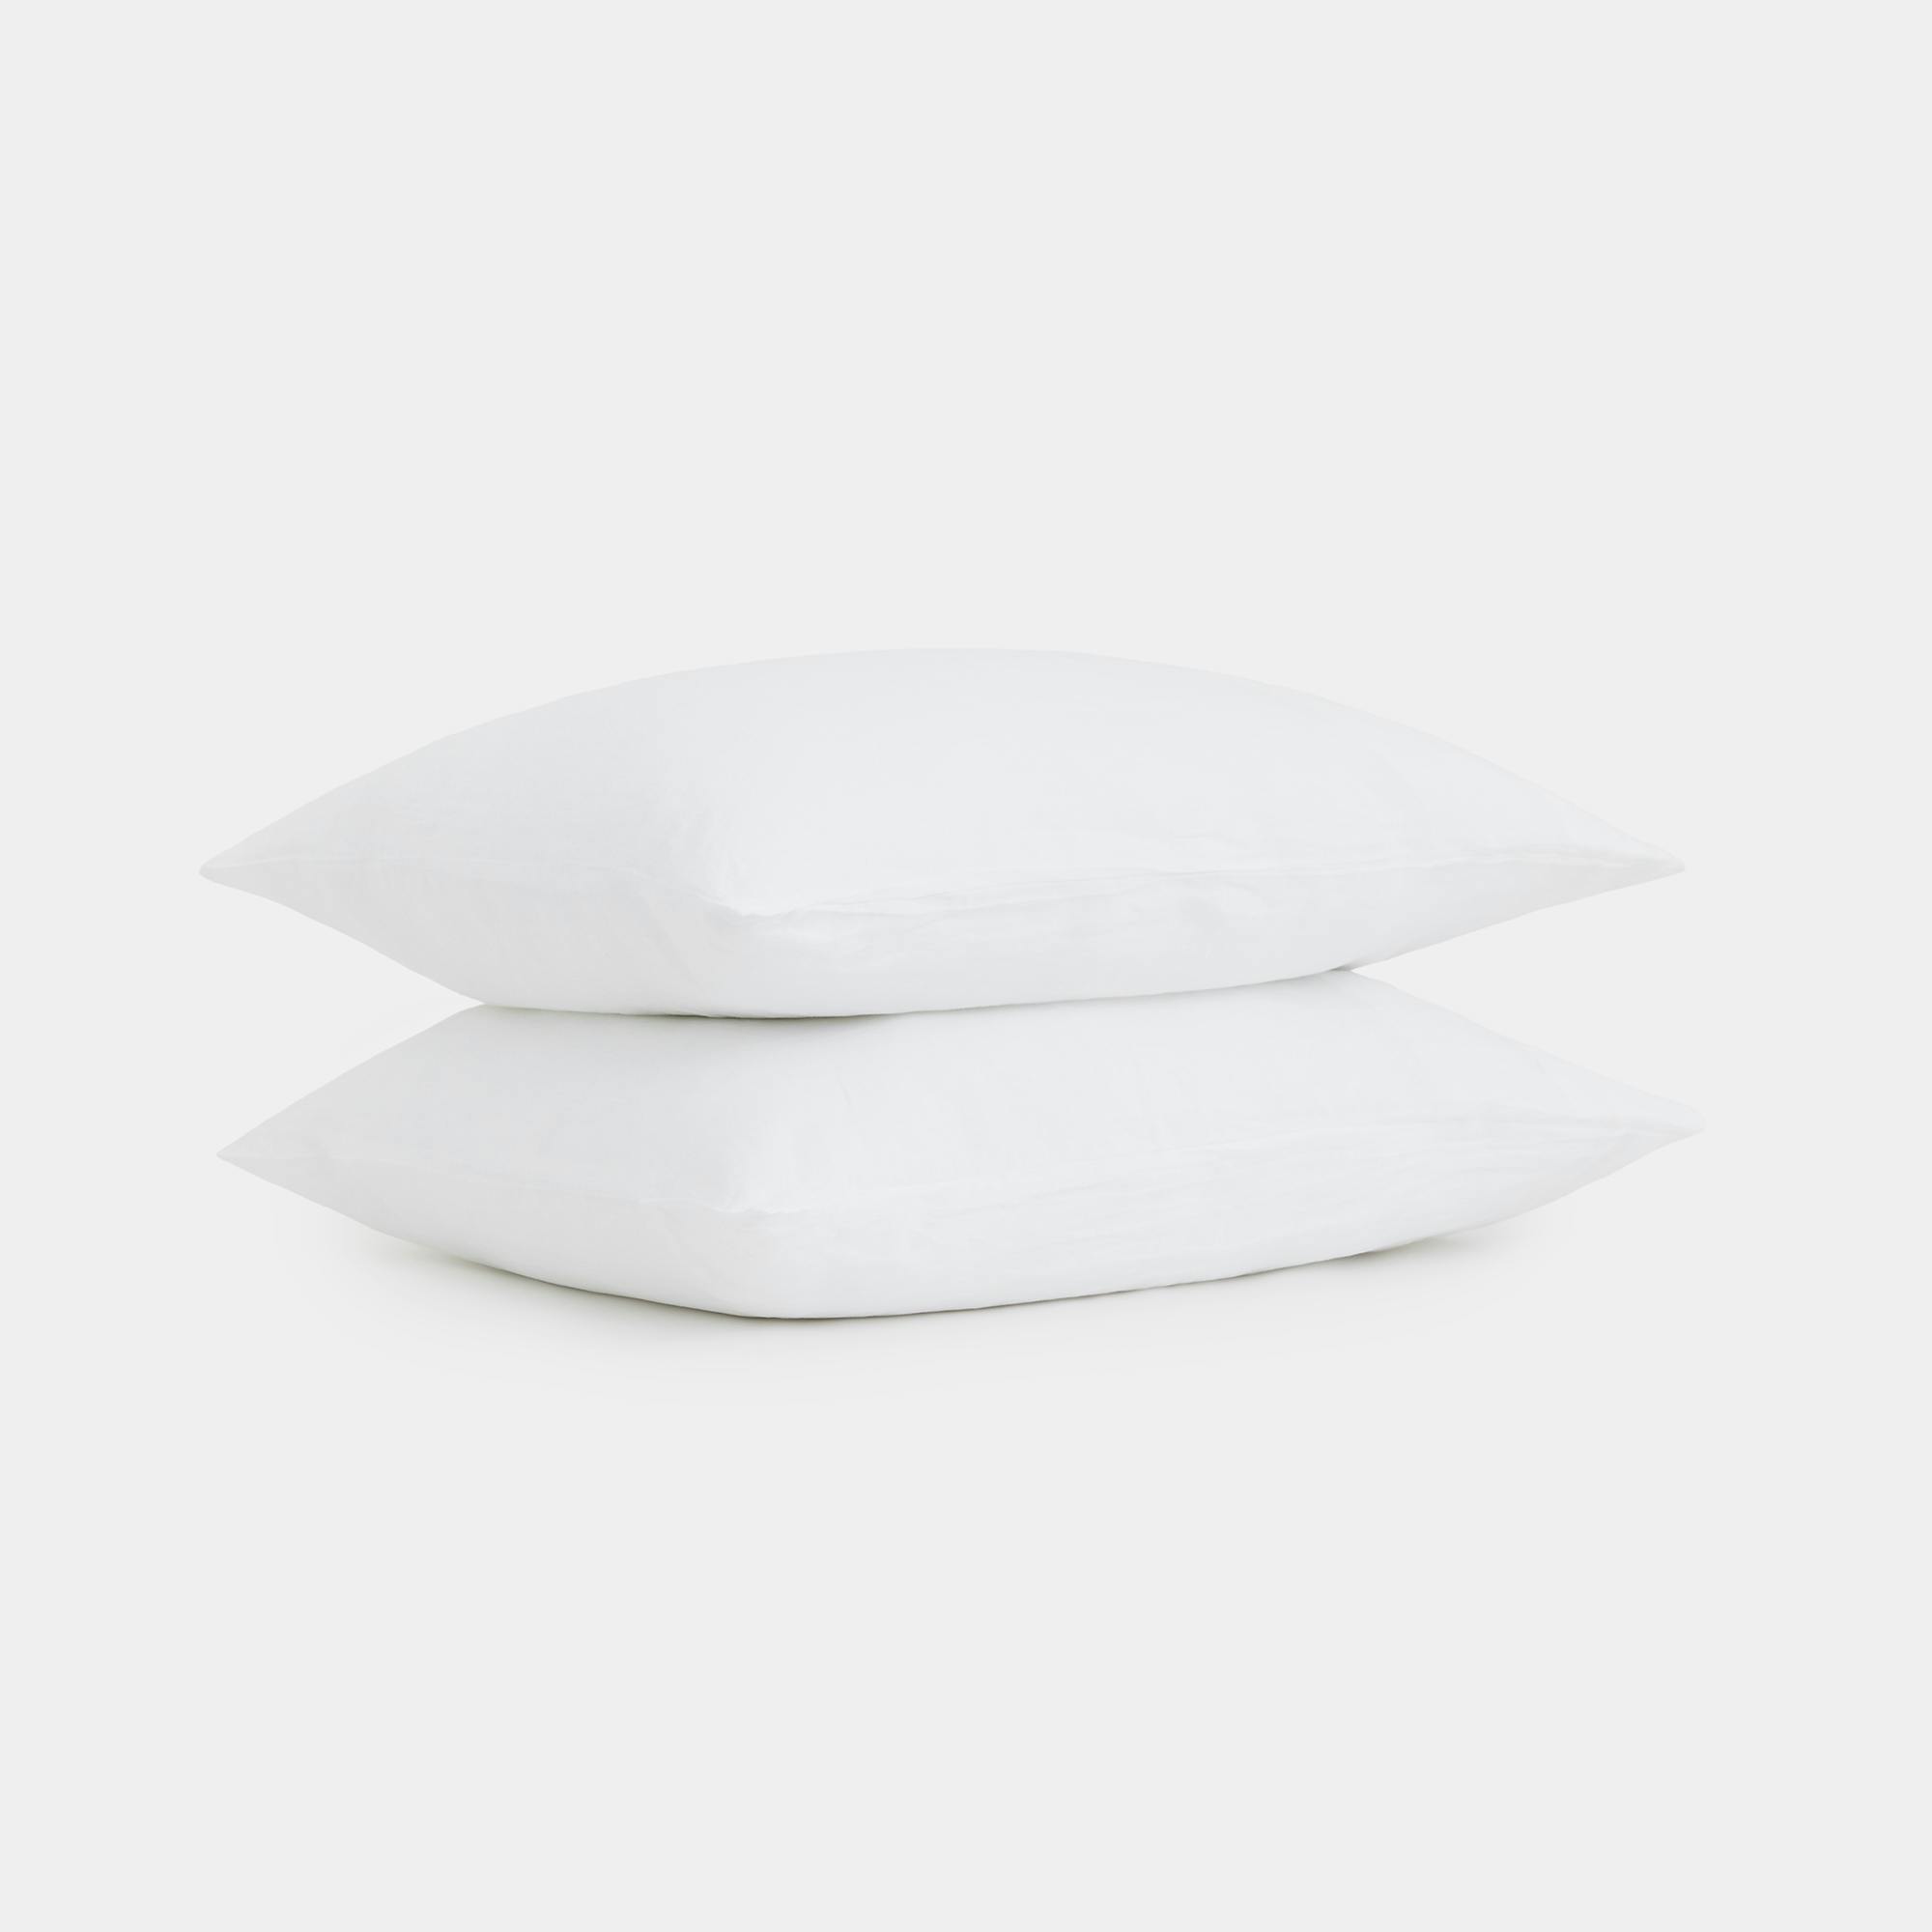 PDP Image: Linen (White) - 3:2 - Pillows Stacked